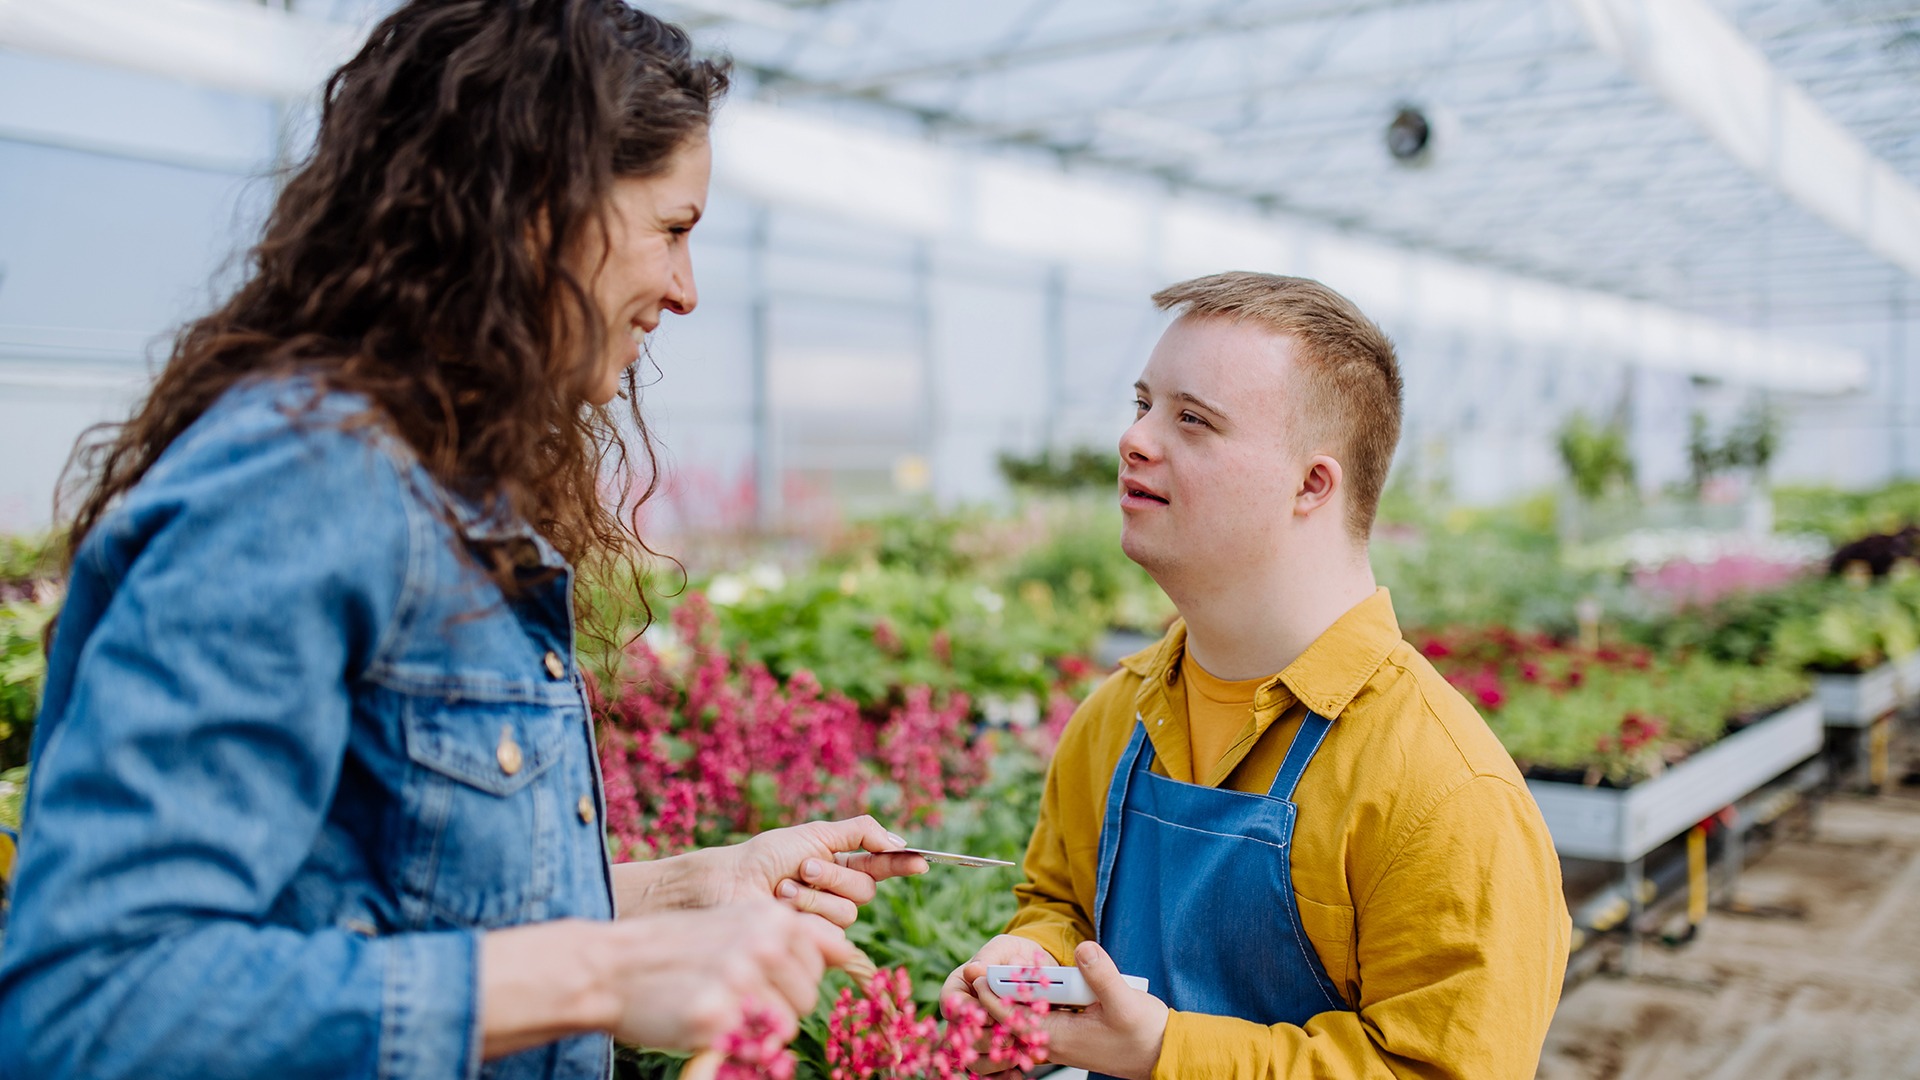 A happy young employee with Down syndrome working in garden centre, taking payment from customer